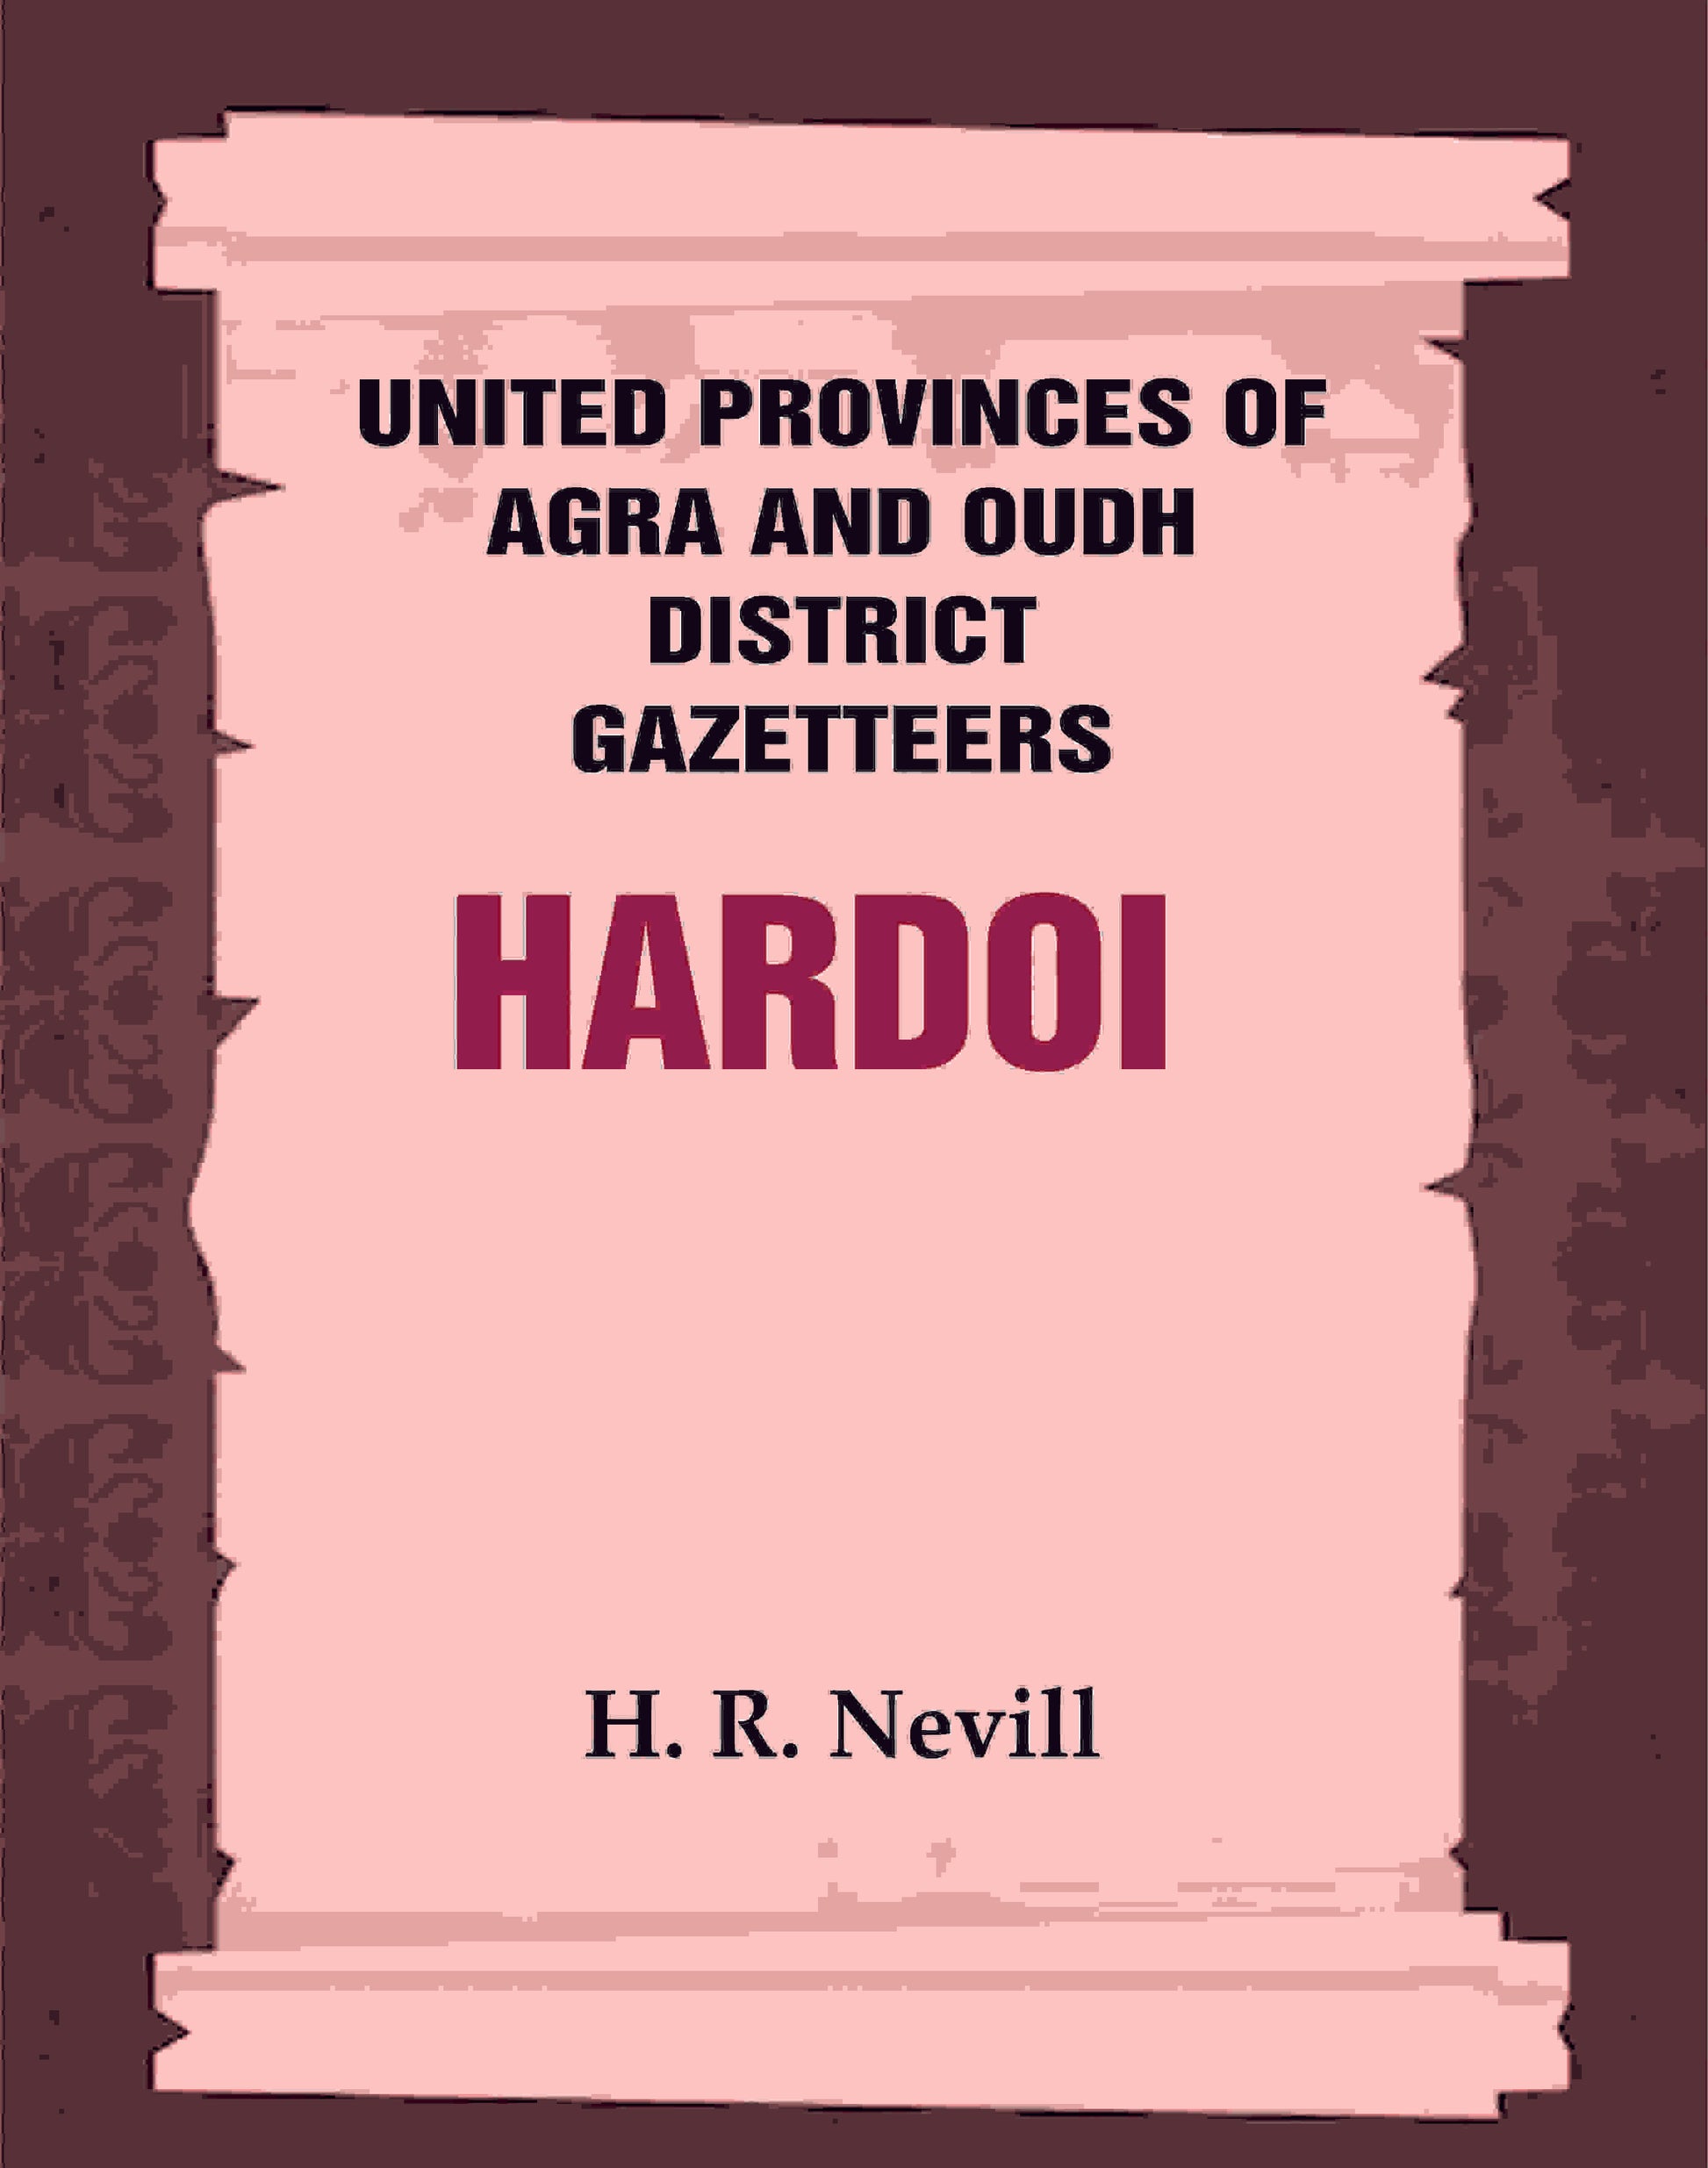 United Provinces of Agra and Oudh District Gazetteers: Hardoi